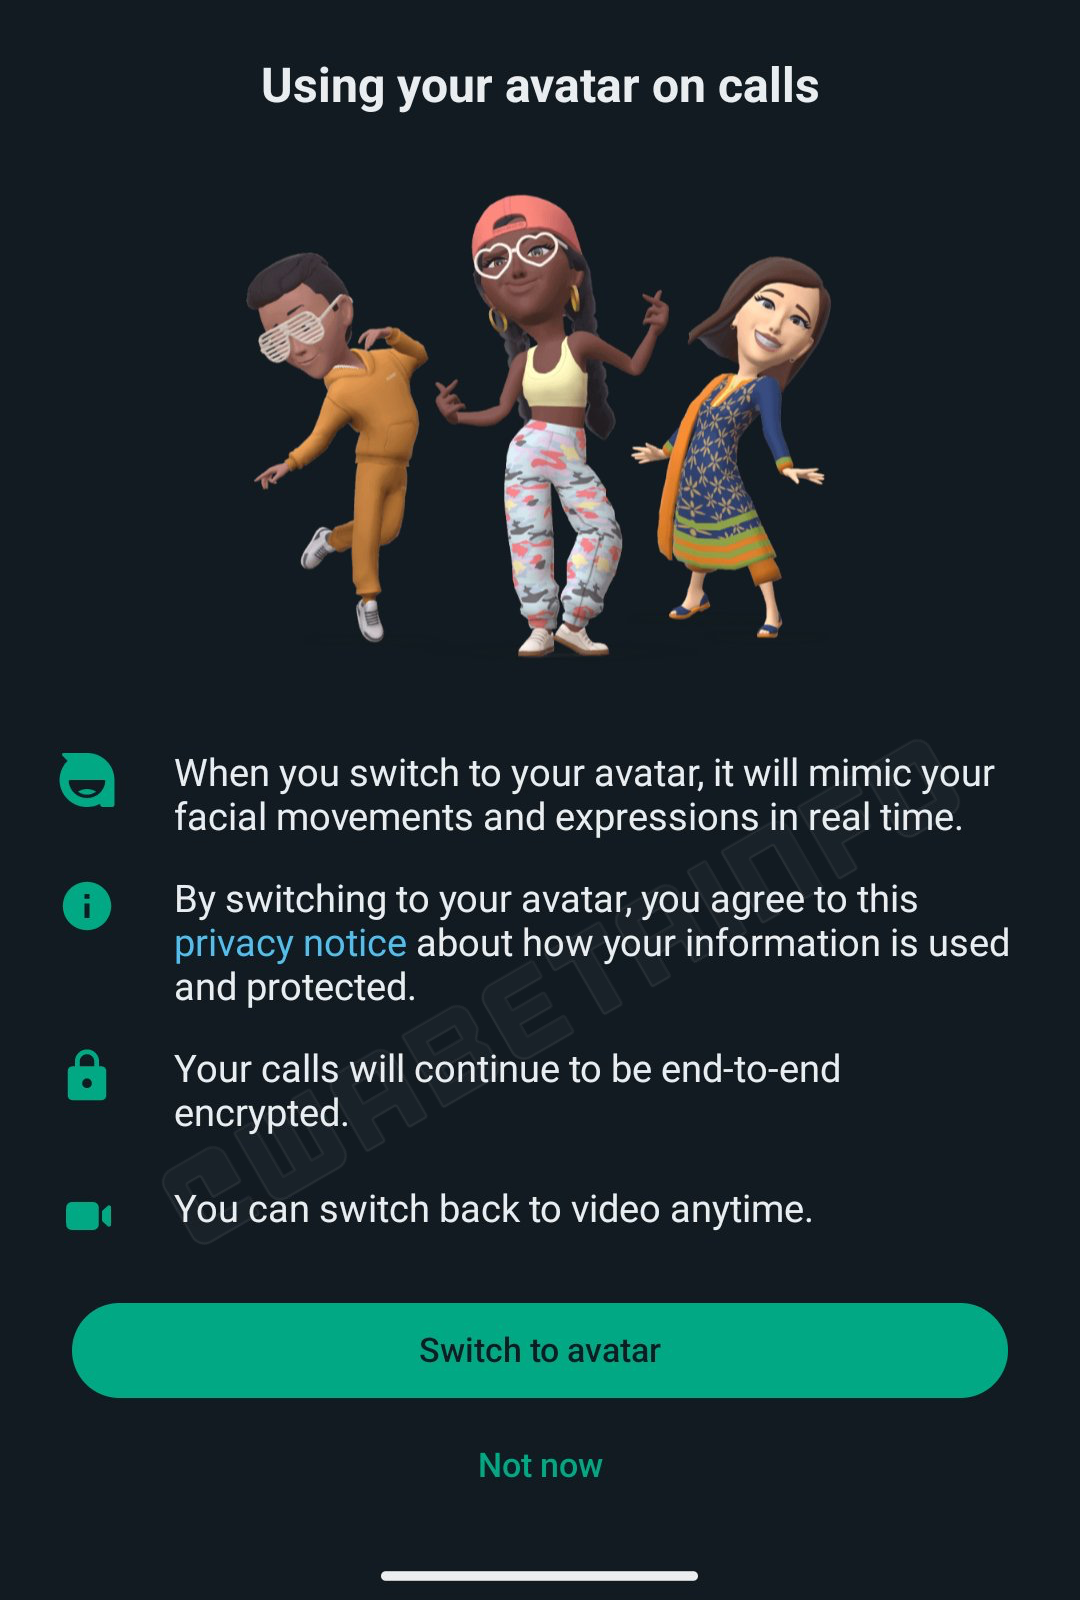 Avatar-based Video Calls in WhatsApp. Source: WaBetaInfo.